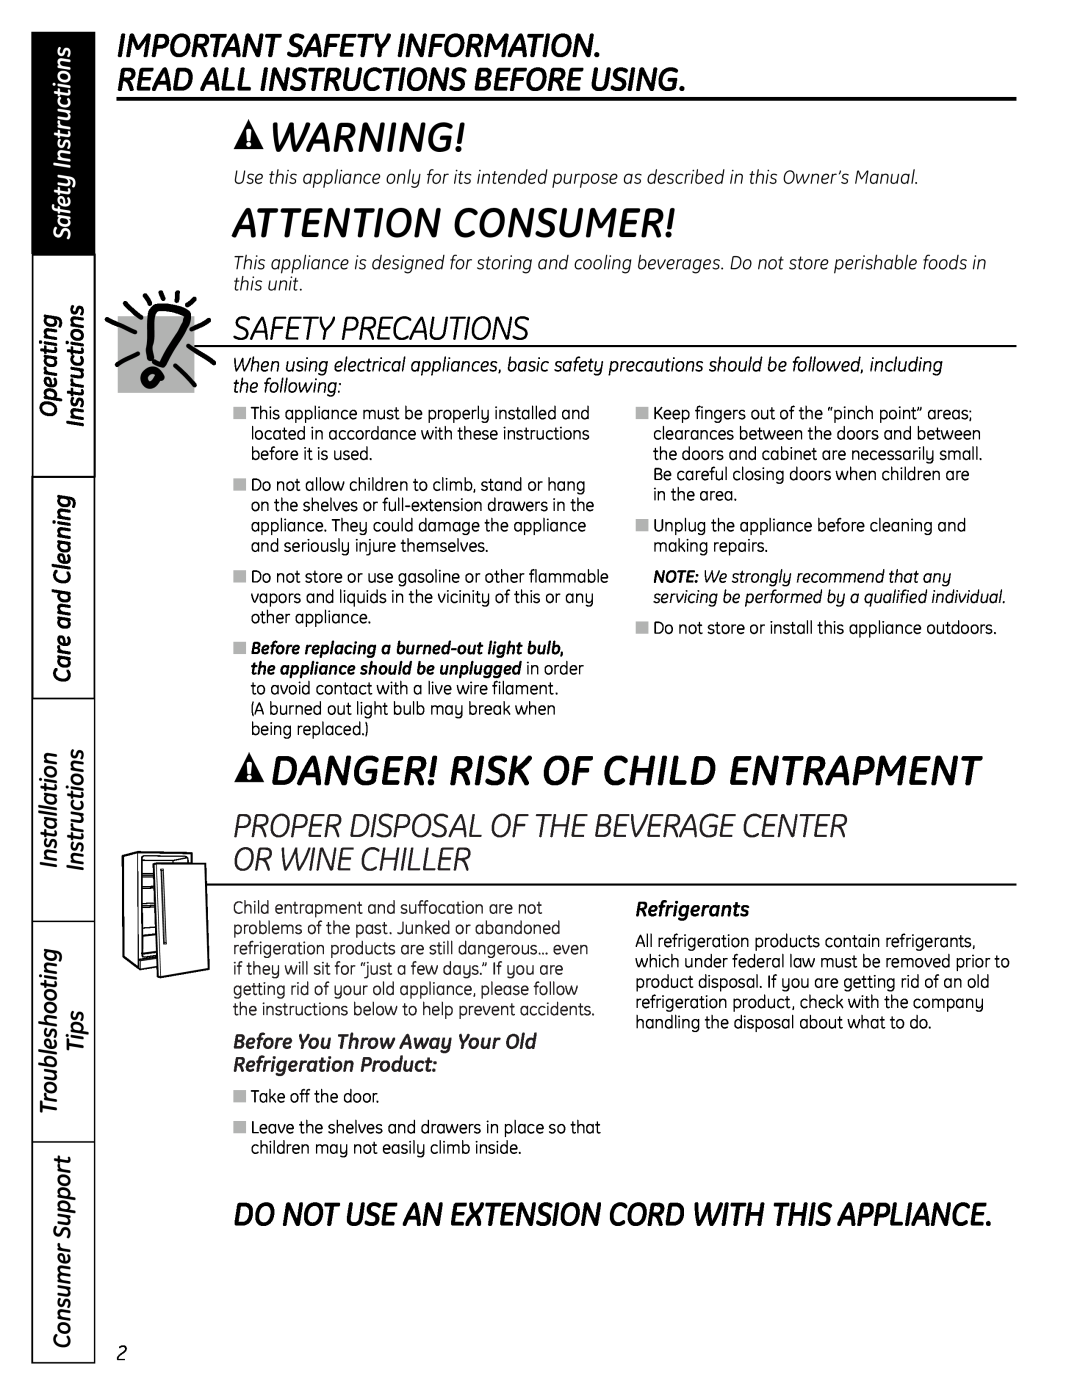 GE PCR06BATSS Attention Consumer, Danger! Risk Of Child Entrapment, Safety Precautions, Safety Instructions, Operating 